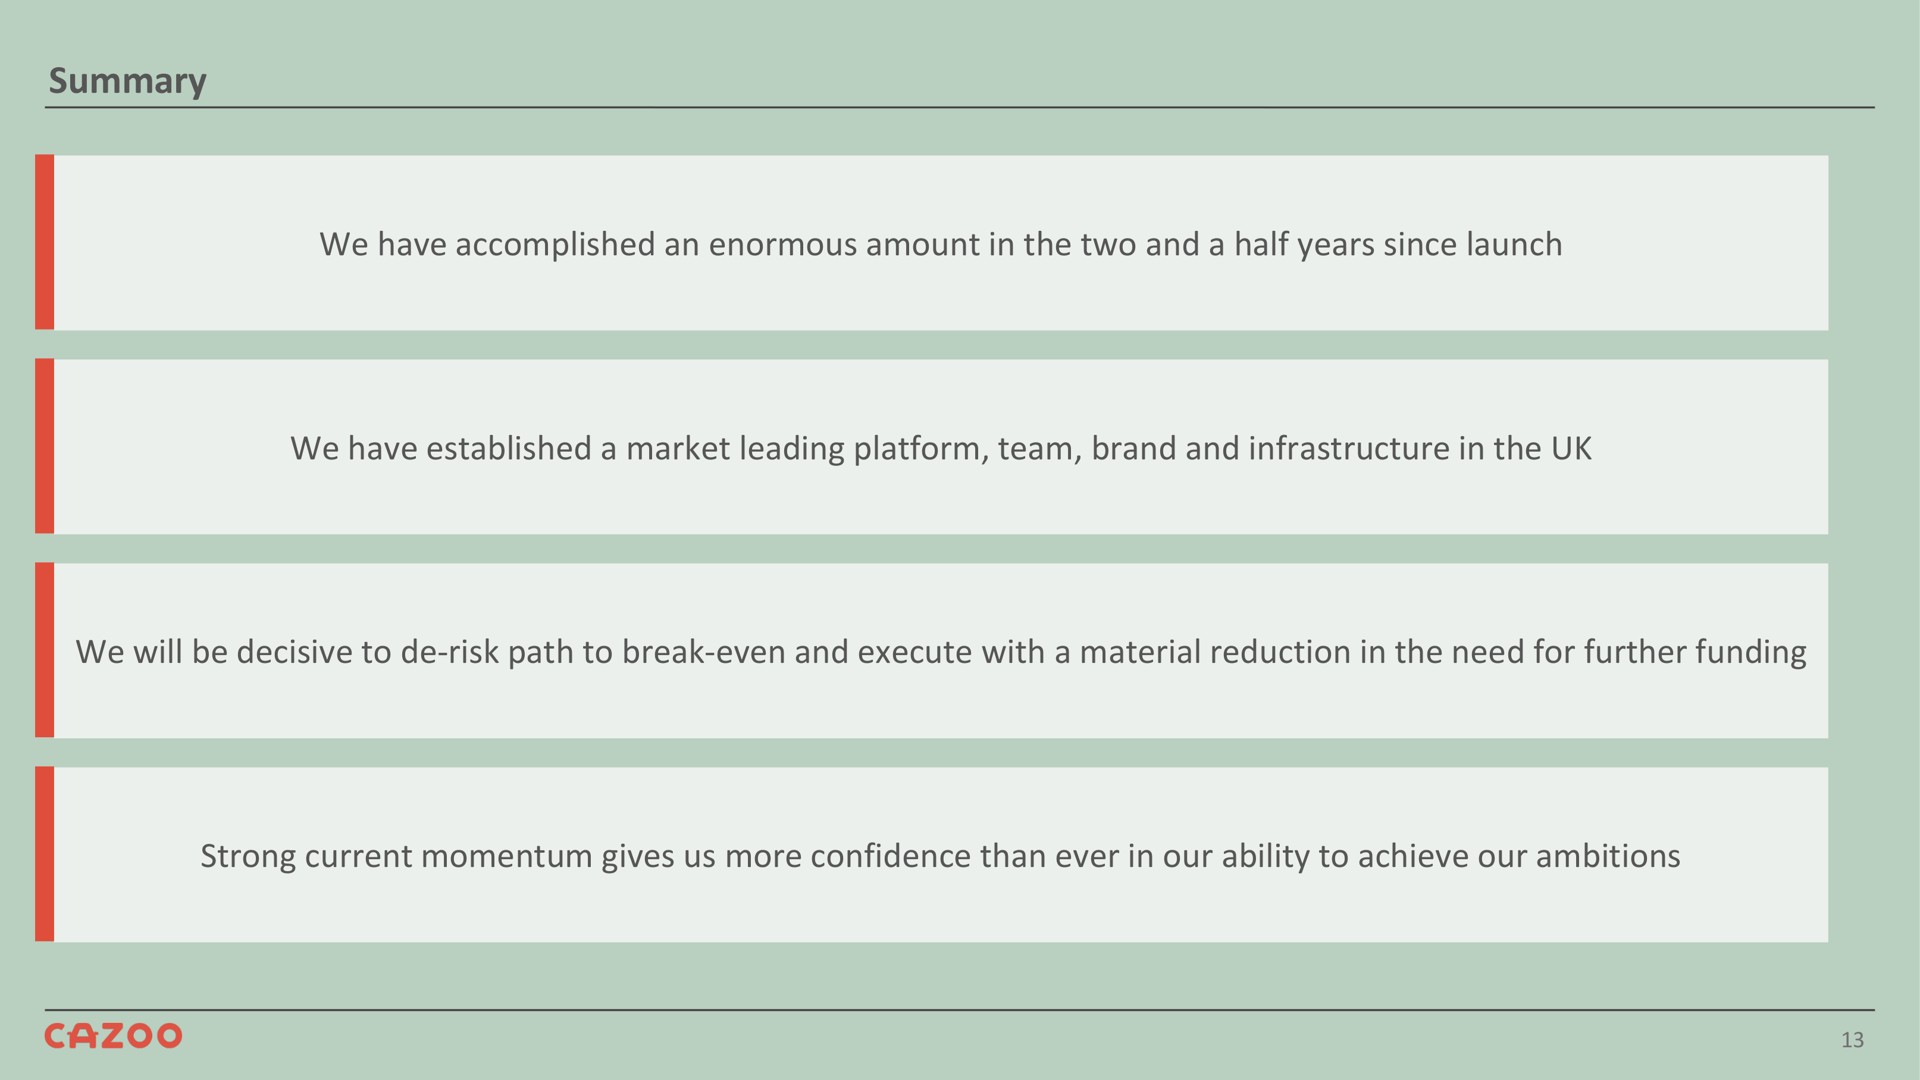 summary we have accomplished an enormous amount in the two and a half years since launch we have established a market leading platform team brand and infrastructure in the we will be decisive to risk path to break even and execute with a material reduction in the need for further funding strong current momentum gives us more confidence than ever in our ability to achieve our ambitions | Cazoo